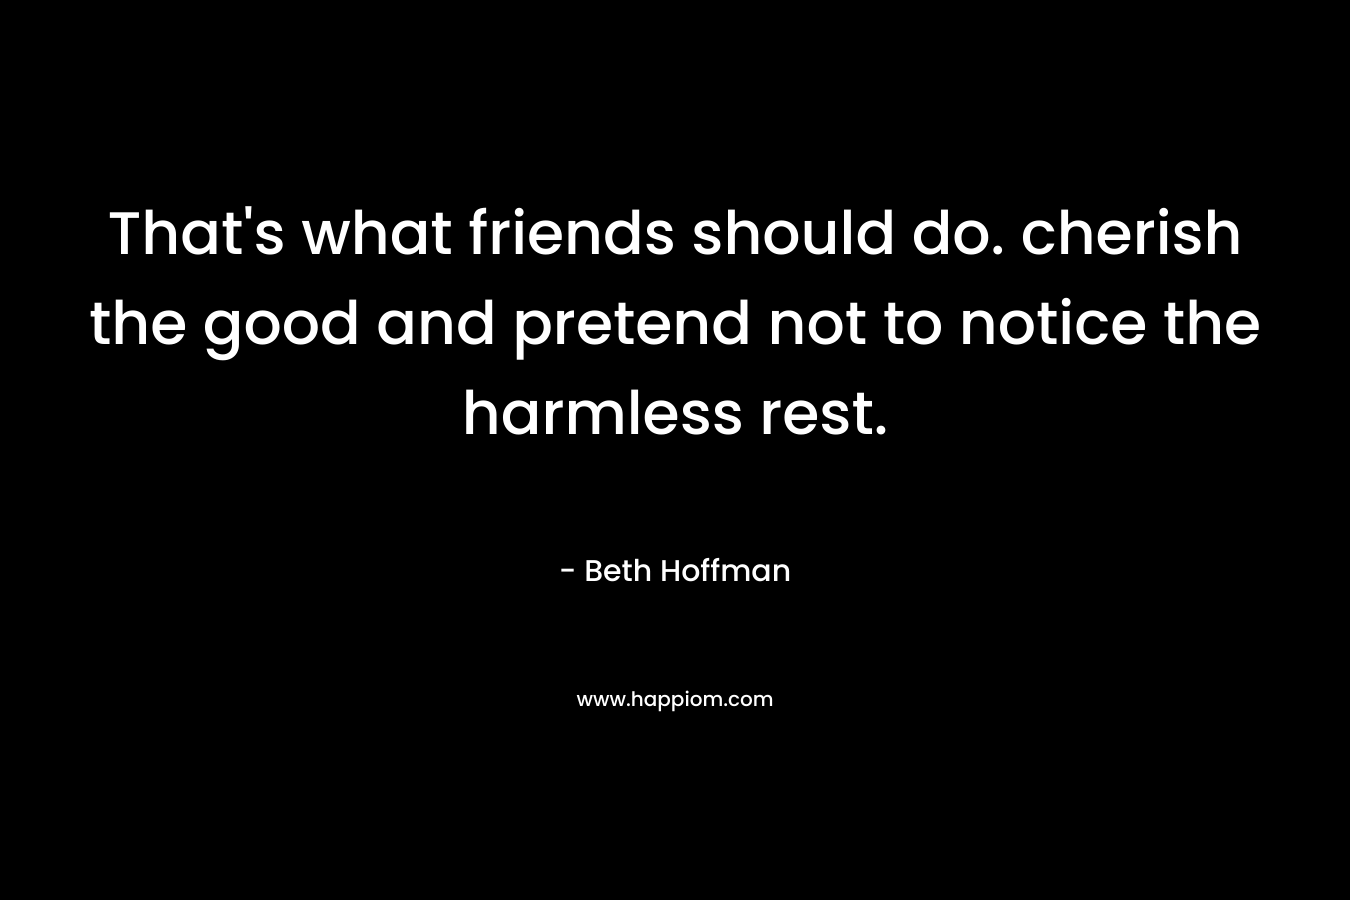 That's what friends should do. cherish the good and pretend not to notice the harmless rest.